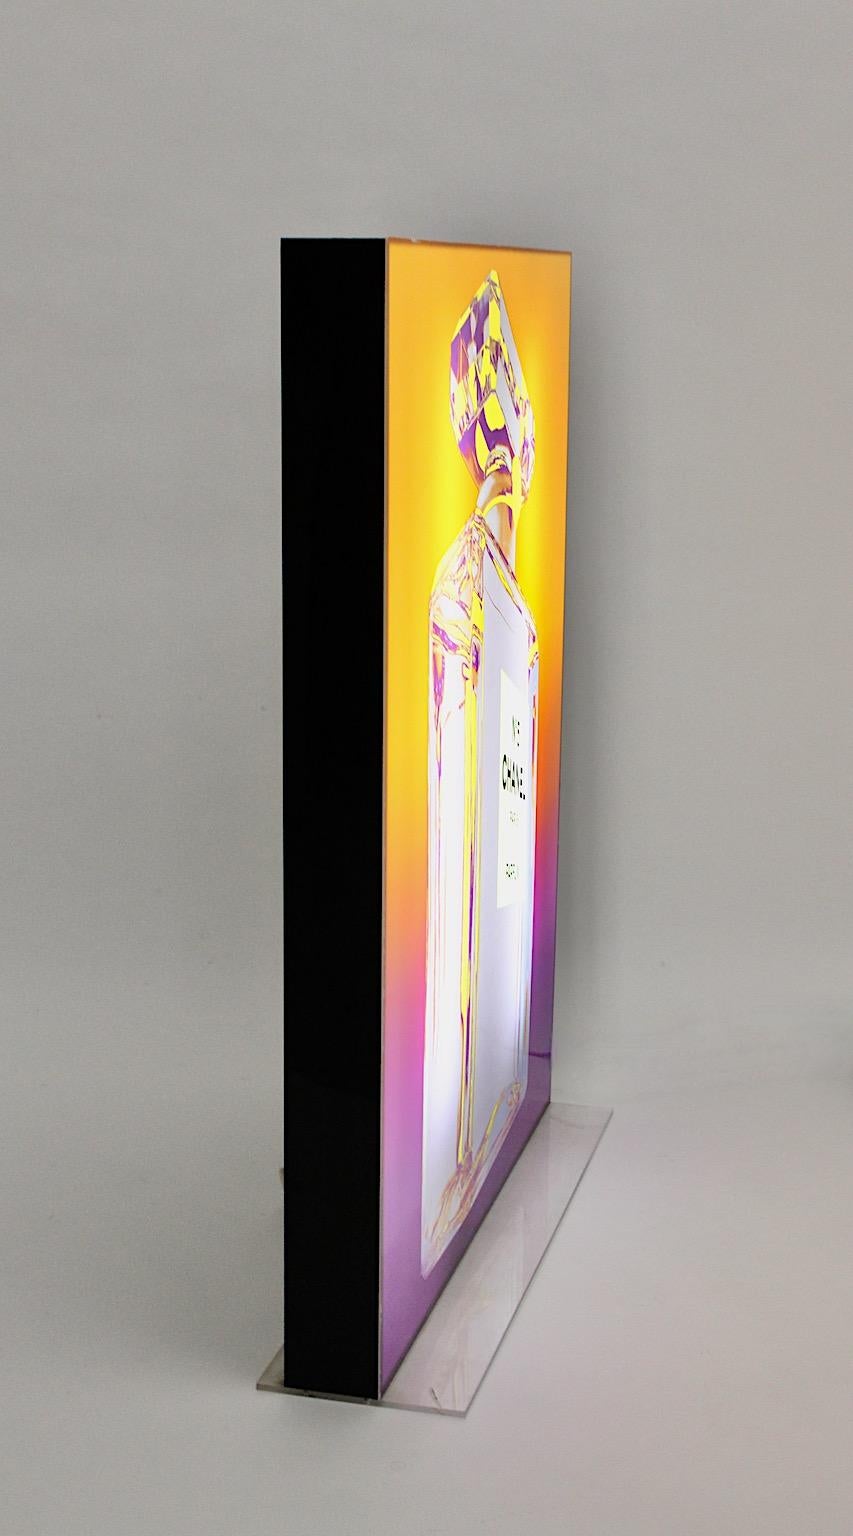 Acrylic Pop Art Chanel No. 5 Vintage Advertising Lighting Display after Andy Warhol 1999 For Sale